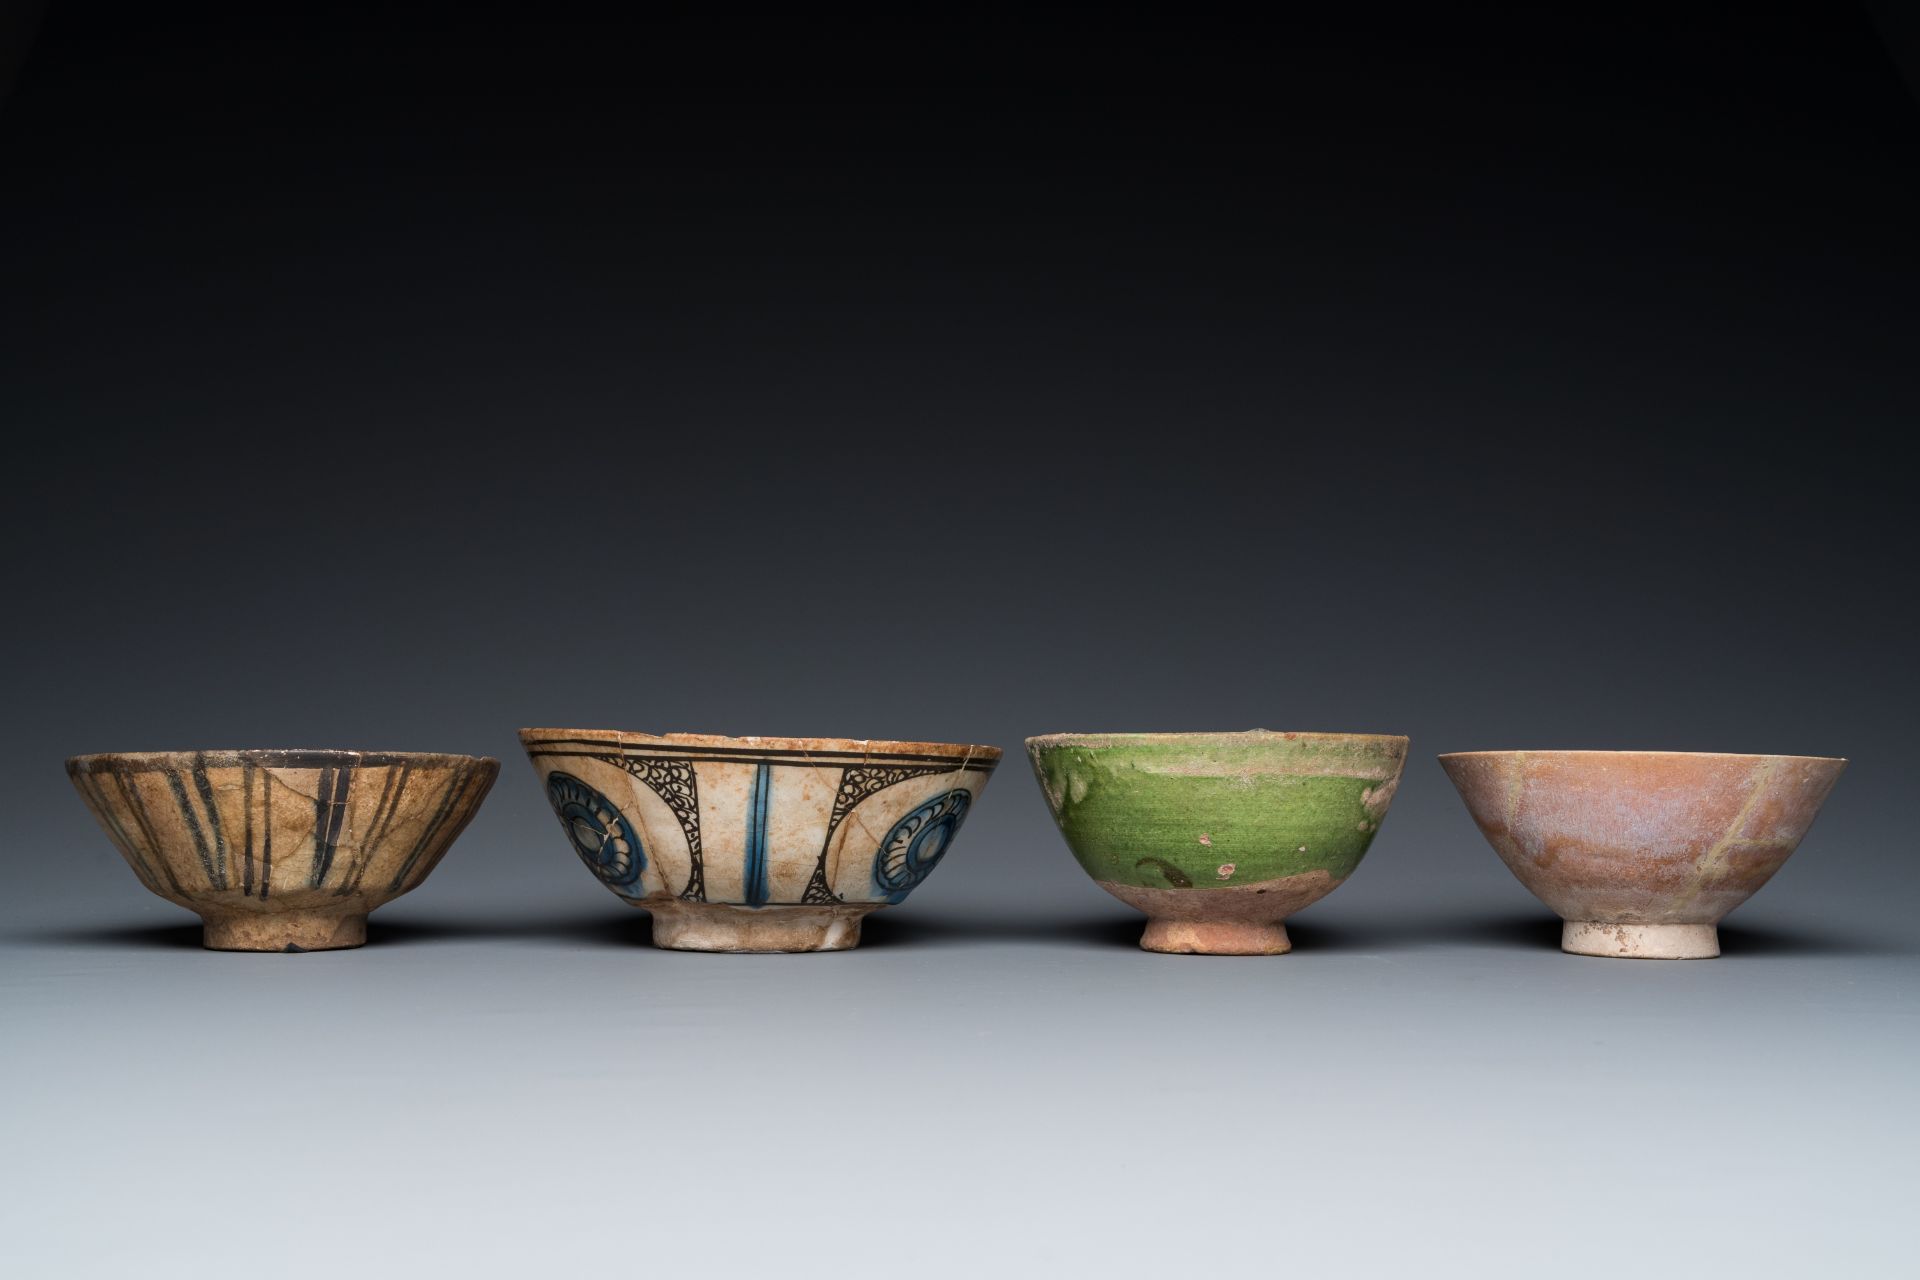 Twelve Ottoman and Persian pottery wares, 13th C. and later - Image 9 of 34